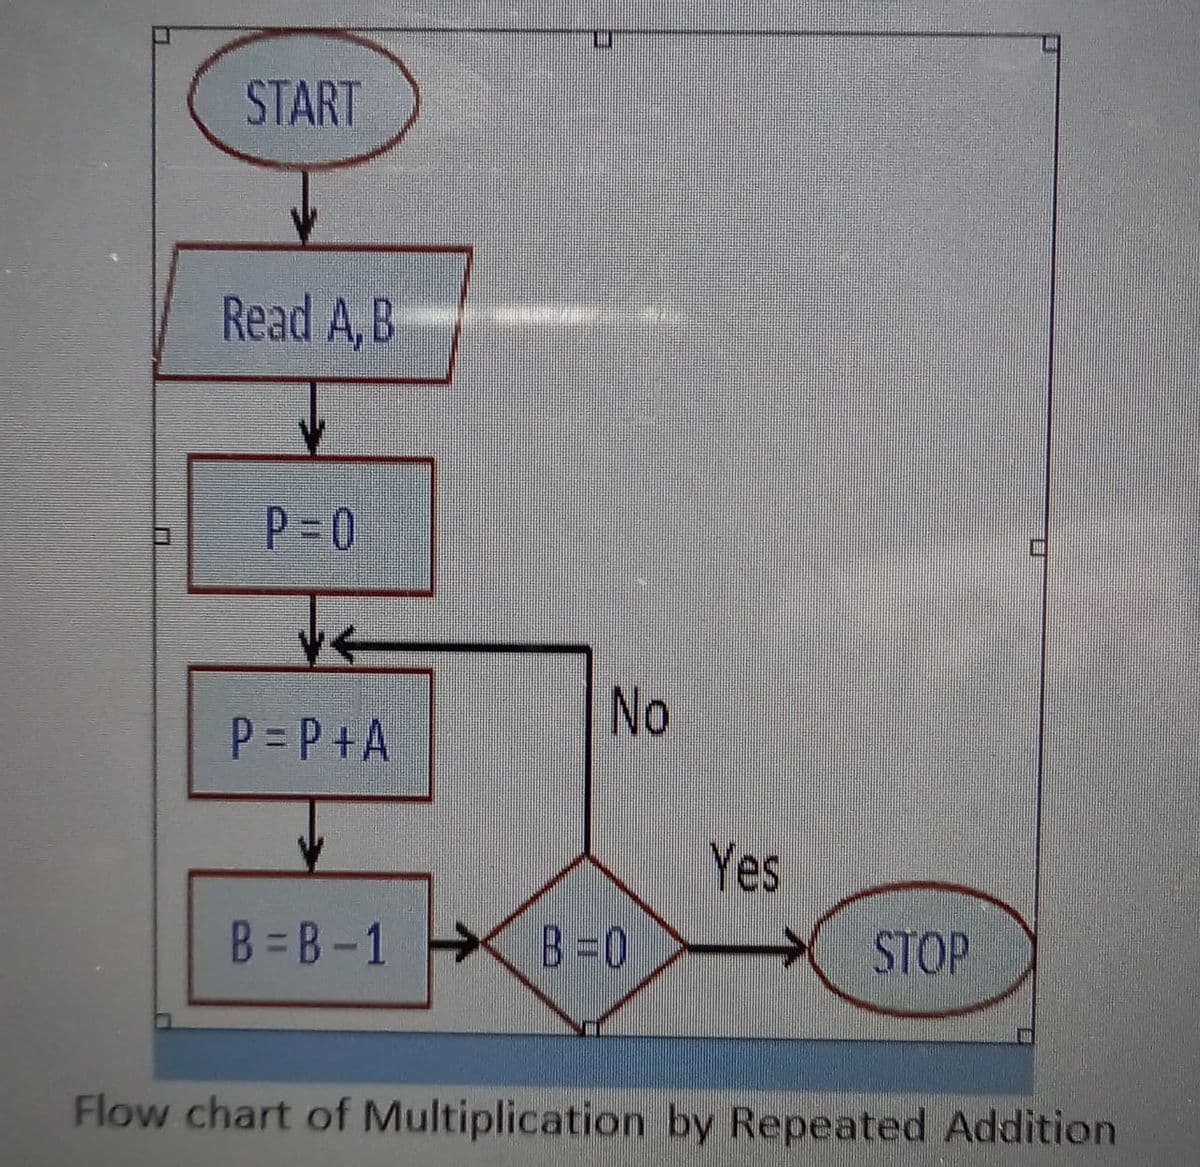 START
Read A,B
P-0
P = P+A
No
Yes
B = B-1 B =0
STOP
Flow chart of Multiplication by Repeated Addition
